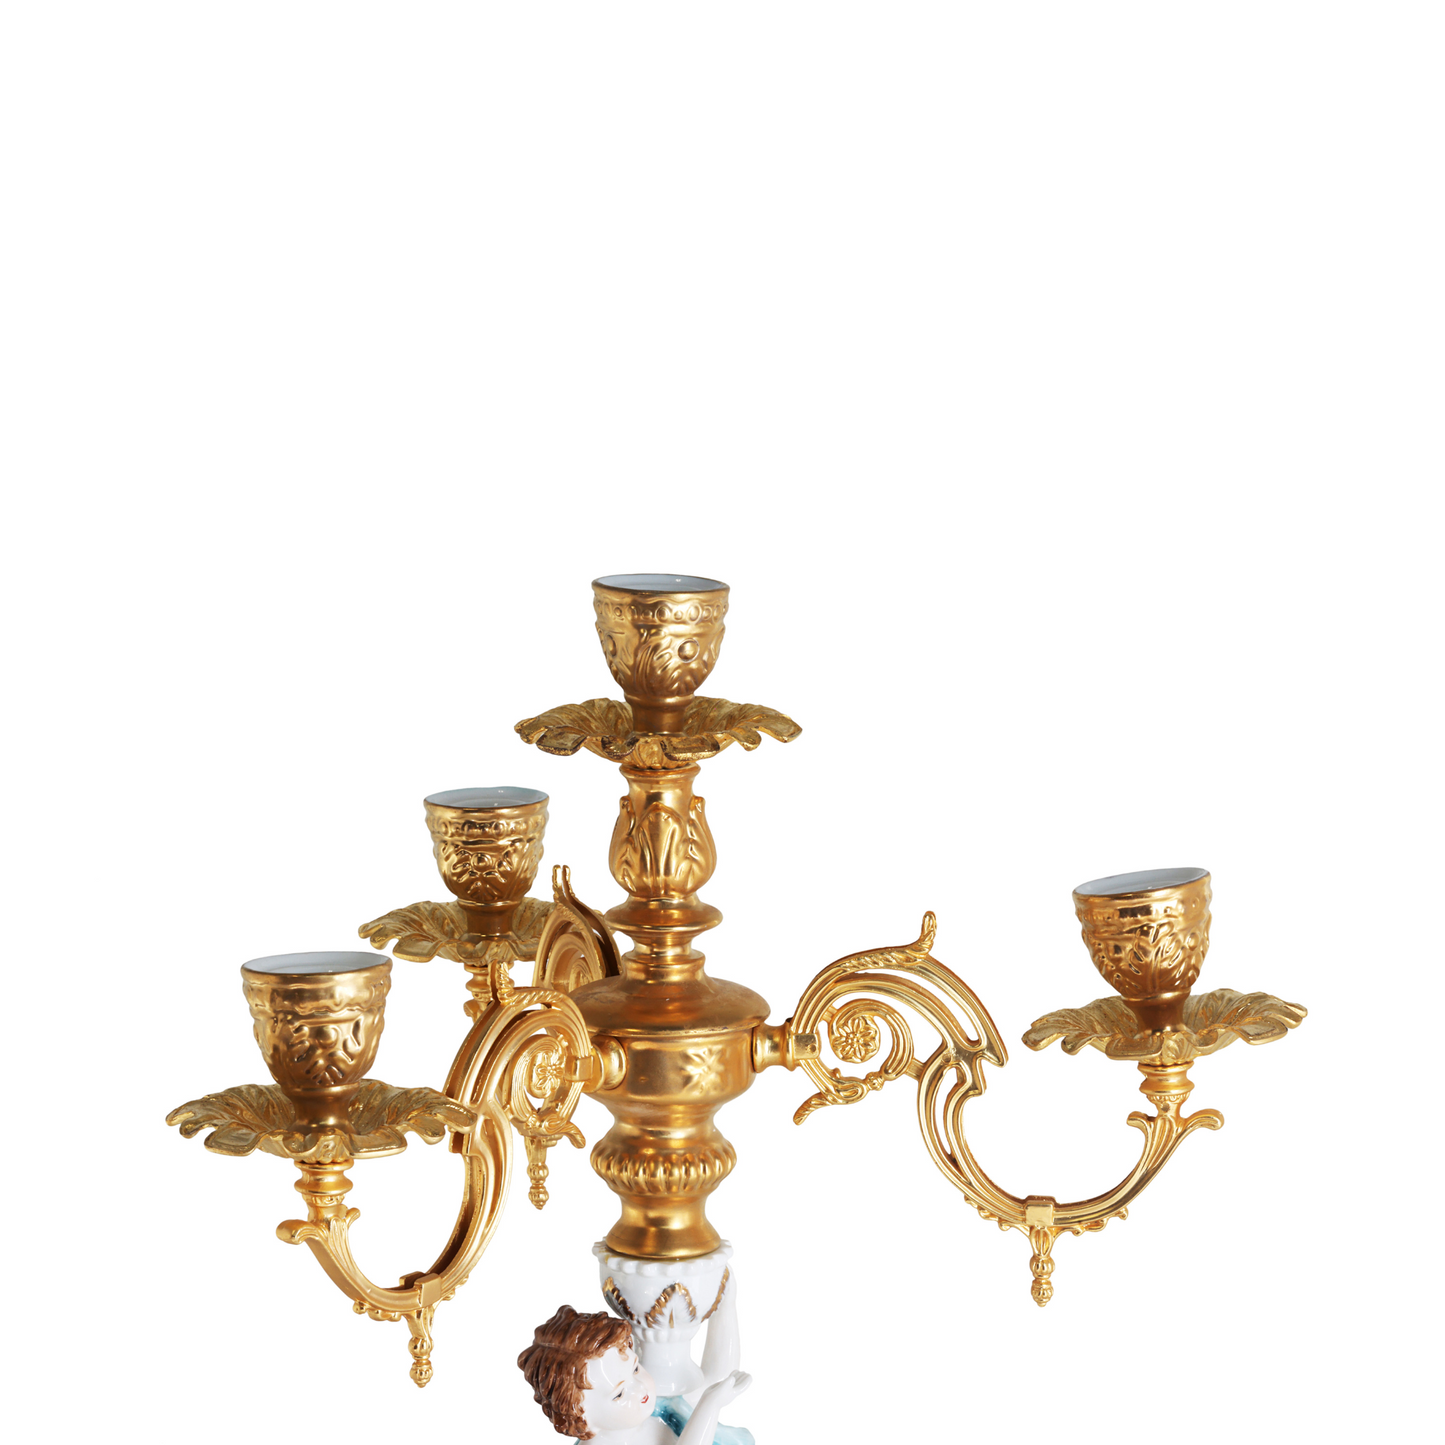 Hand-Painted Rococo Style Candelabra